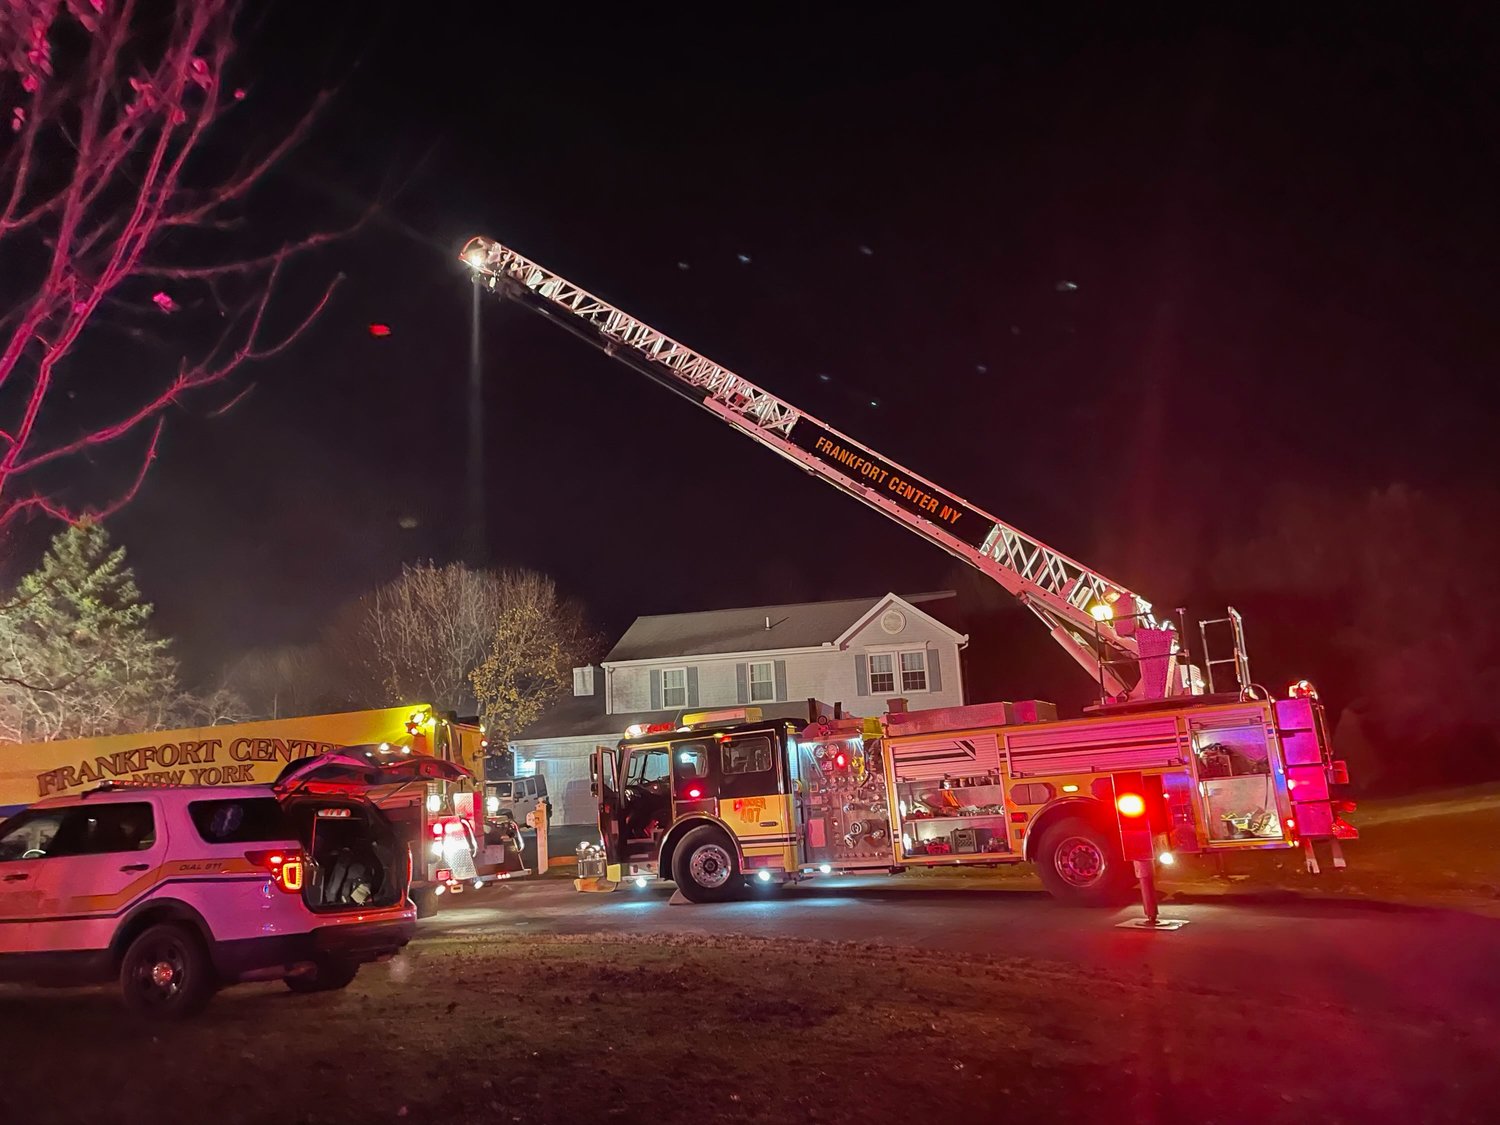 Fire crews battle a roof fire on Wild Flower Circle in Frankfort Thursday night. Fire officials said the residents escaped without injury. The cause of the fire remains under investigation.